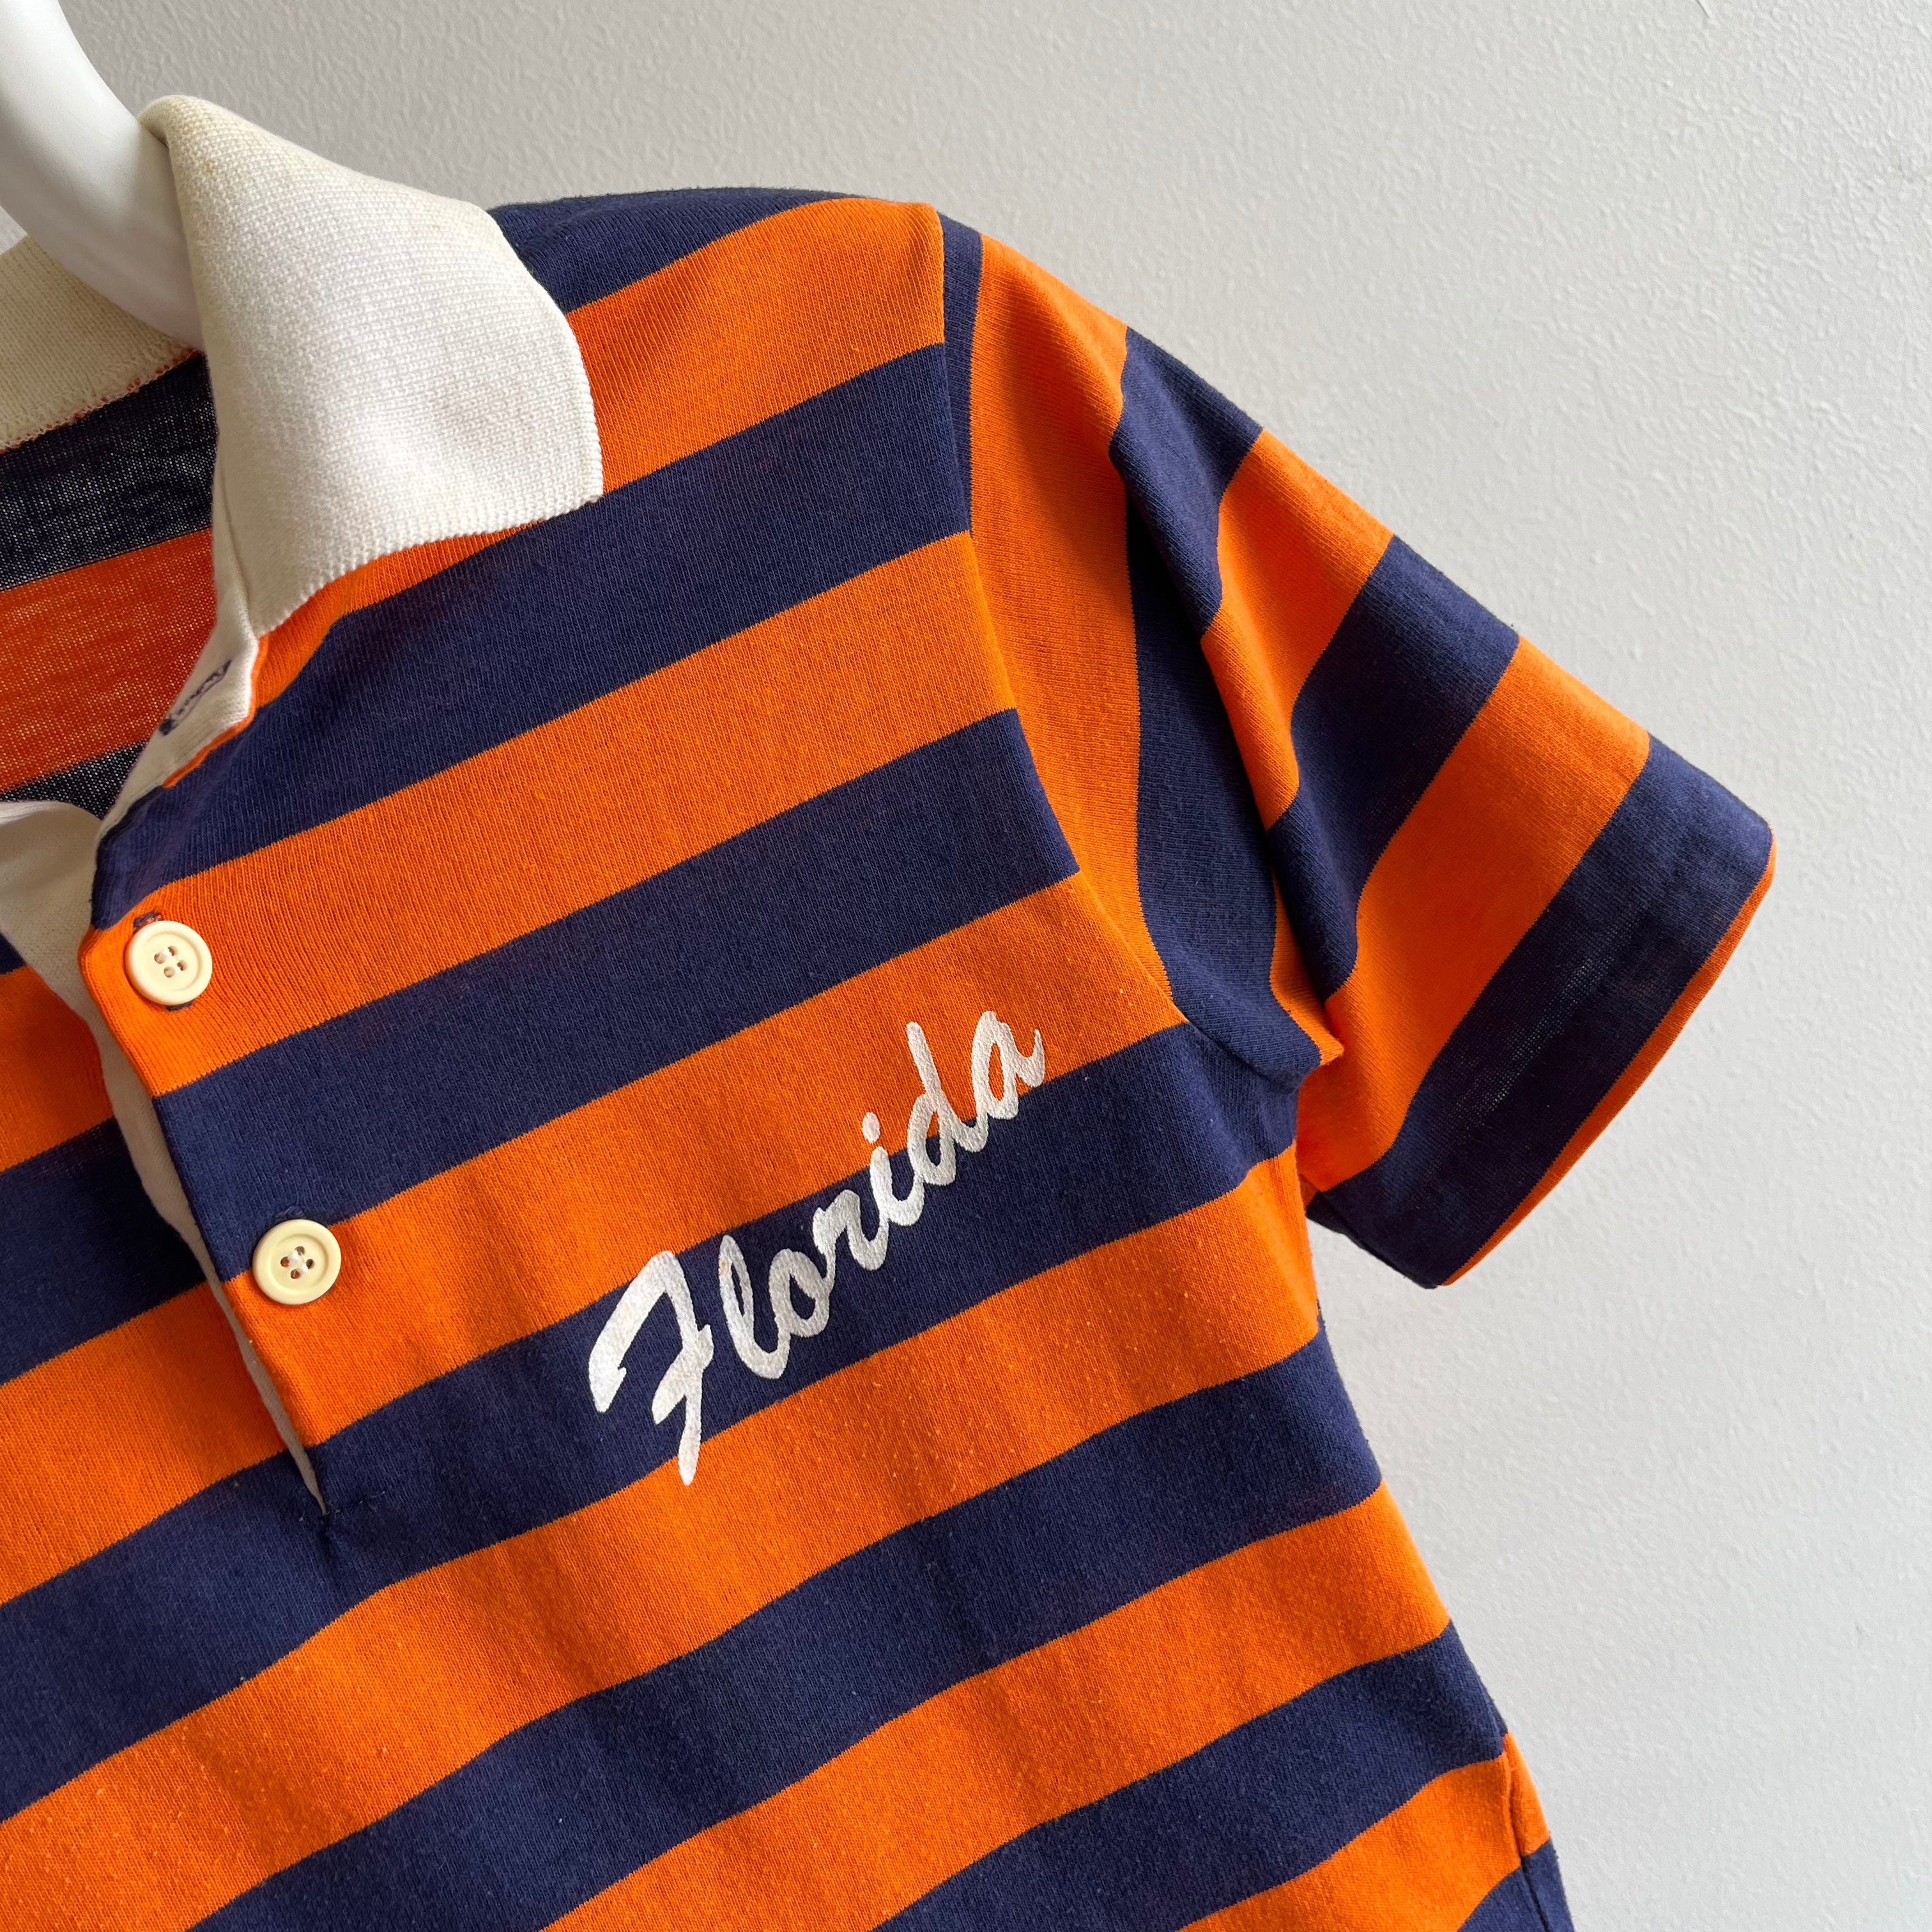 1970s Fitted Florida Polo Shirt by Collegiate Pacific